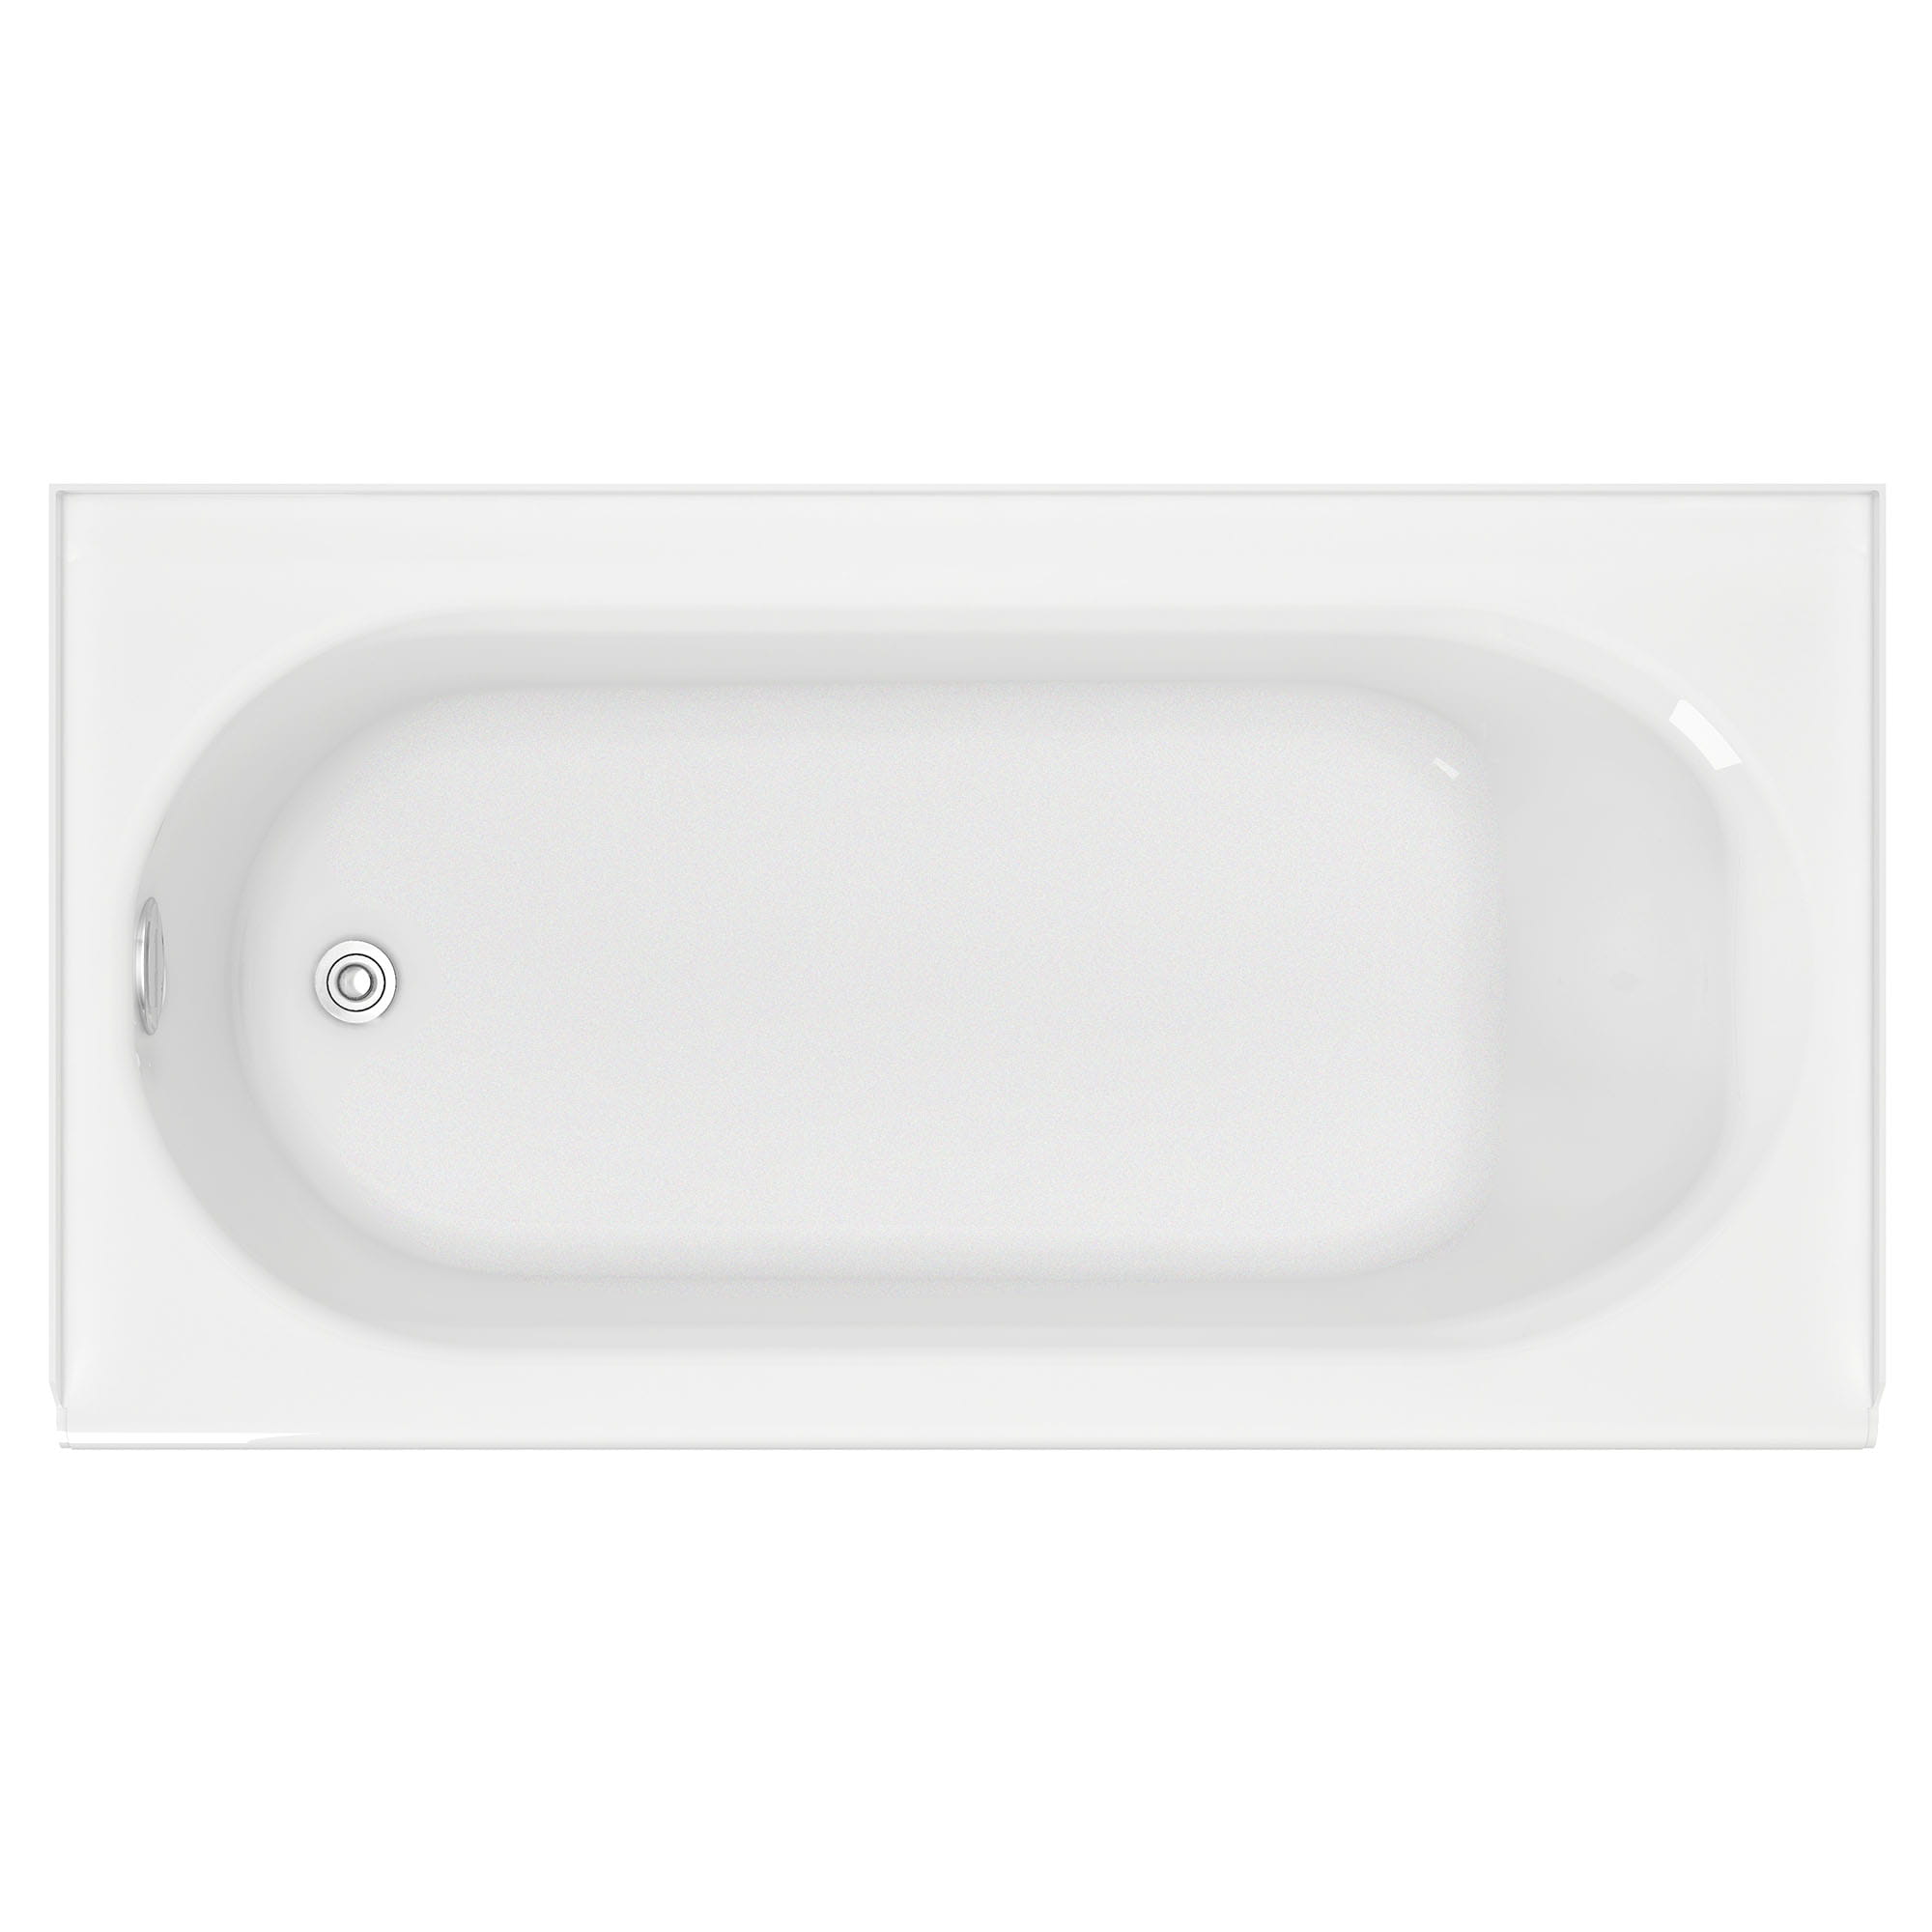 Princeton Americast 60 x 34 Inch Integral Apron Bathtub Above Floor Rough Left Hand Outlet Luxury Ledge with Integral Drain WHITE